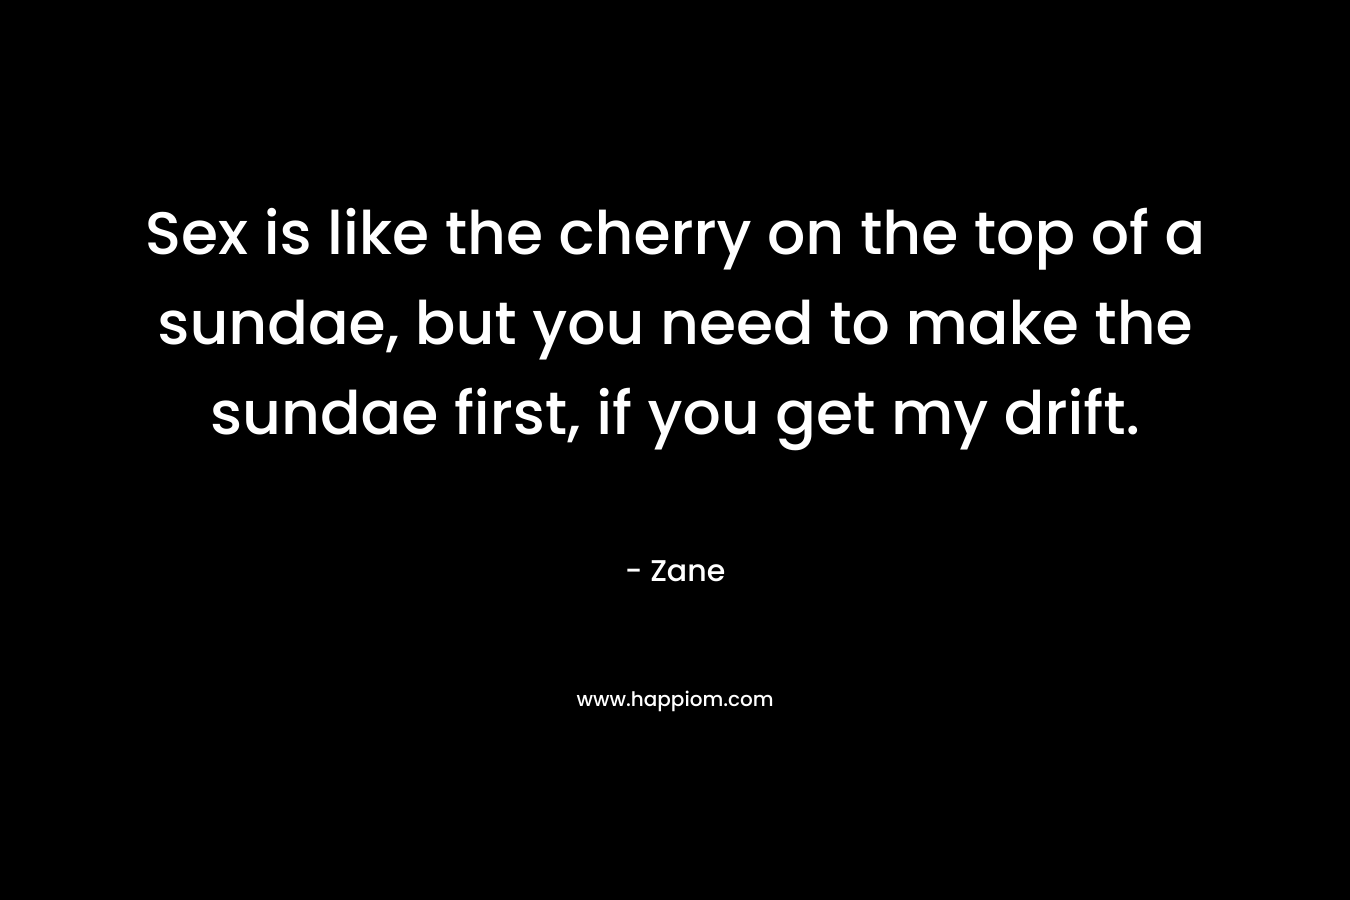 Sex is like the cherry on the top of a sundae, but you need to make the sundae first, if you get my drift. – Zane